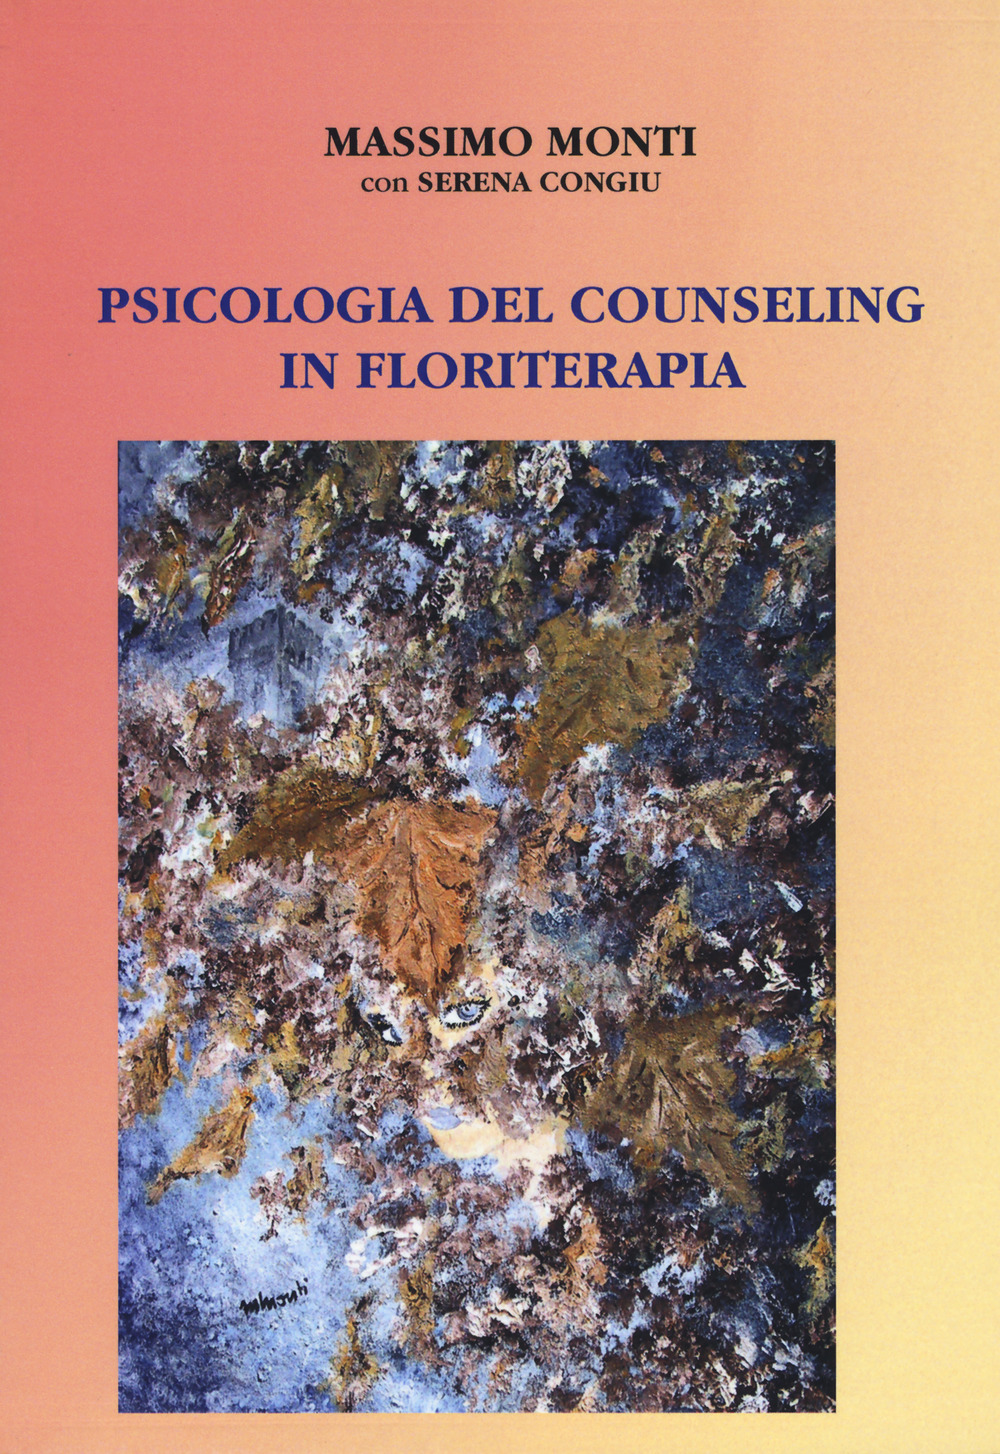 Image of Psicologia del counseling in floriterapia